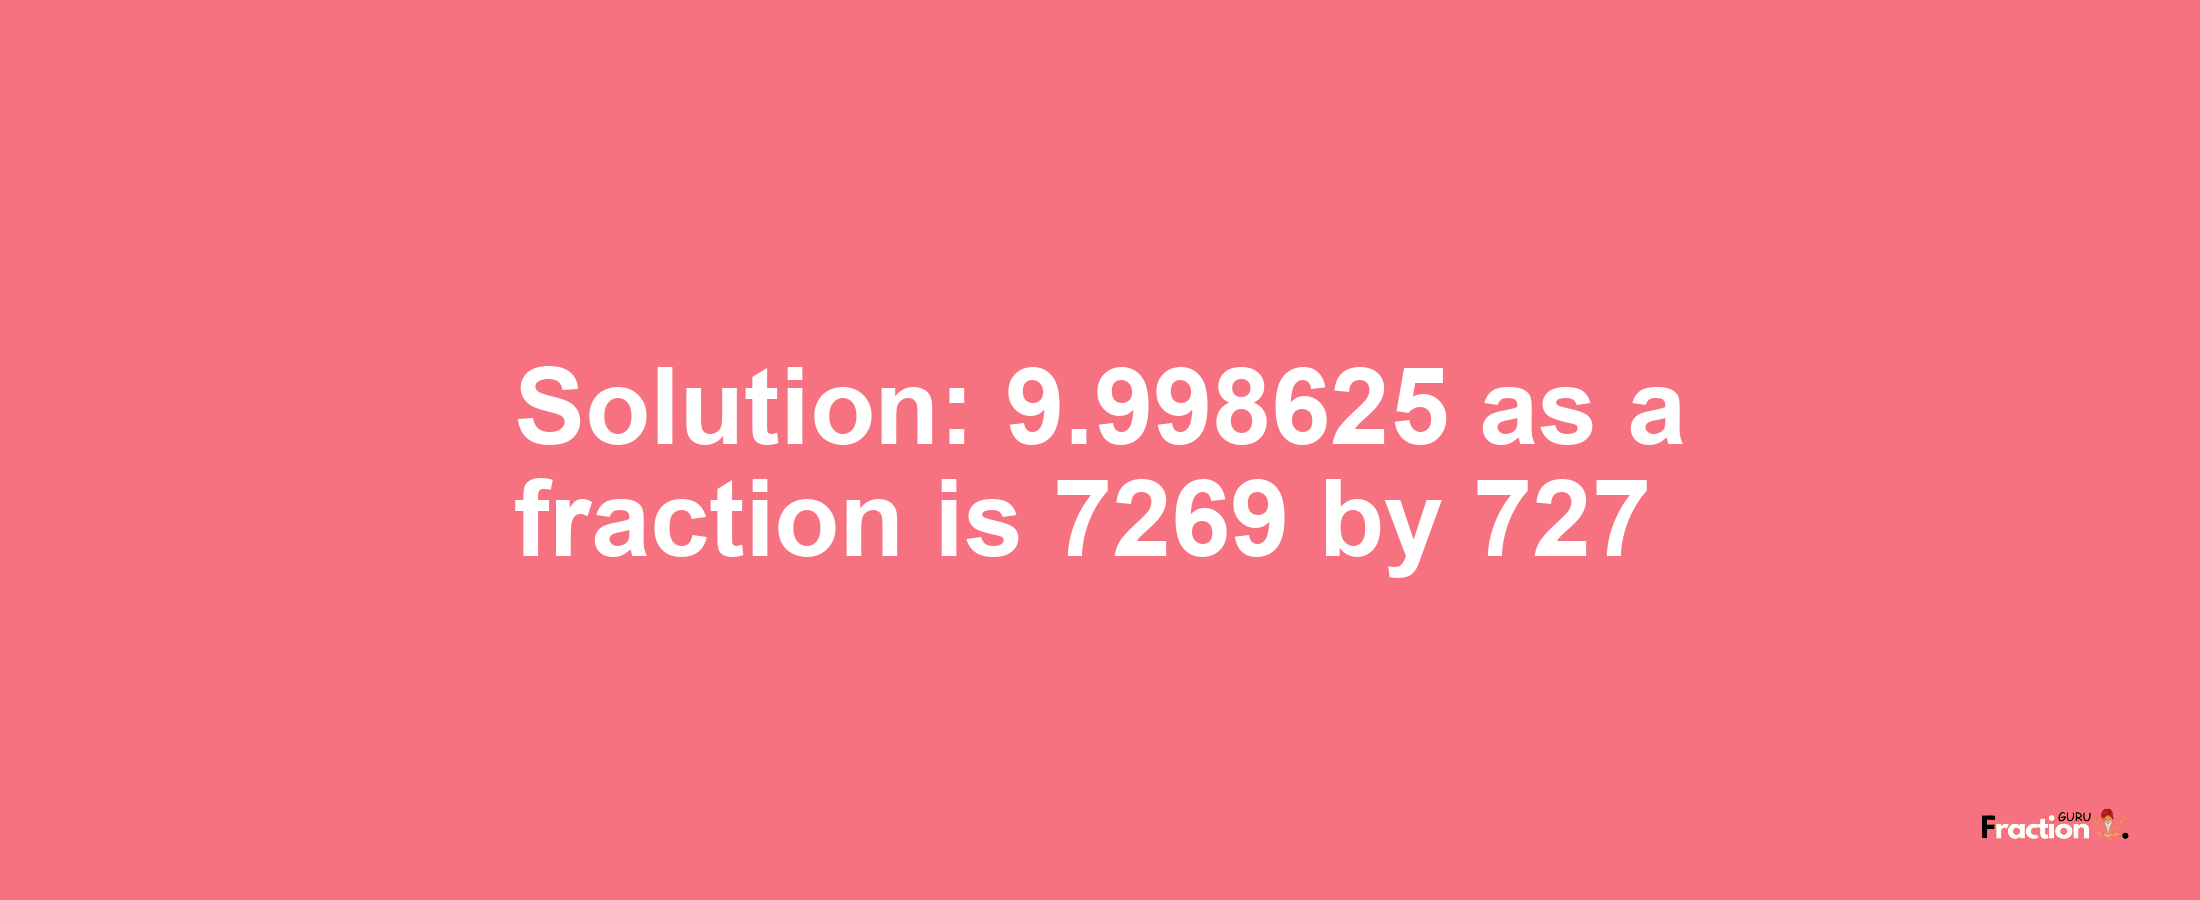 Solution:9.998625 as a fraction is 7269/727